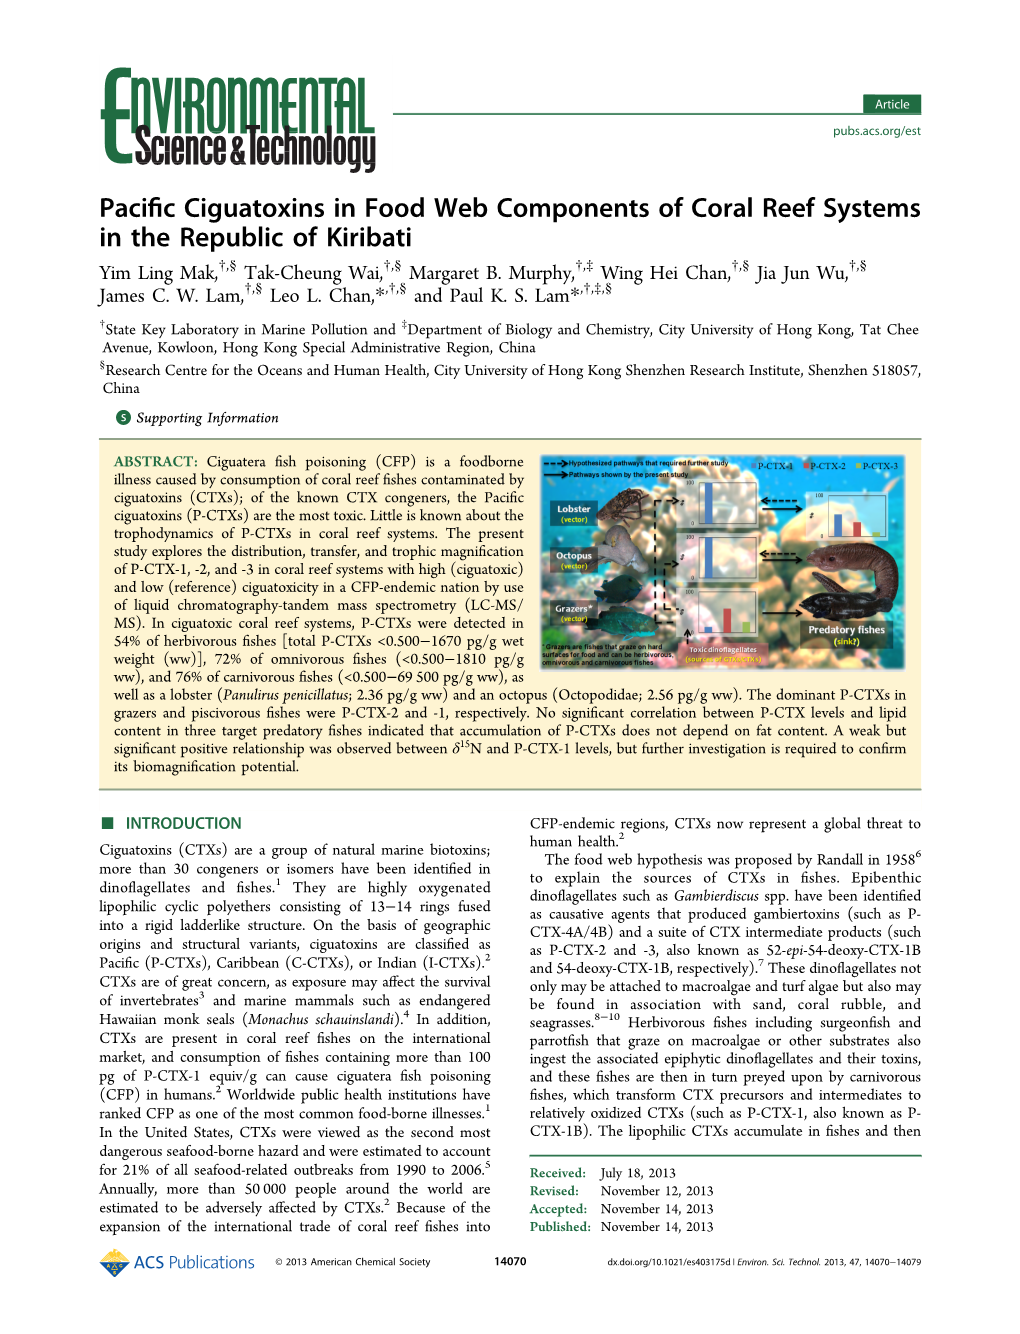 Pacific Ciguatoxins in Food Web Components of Coral Reef Systems